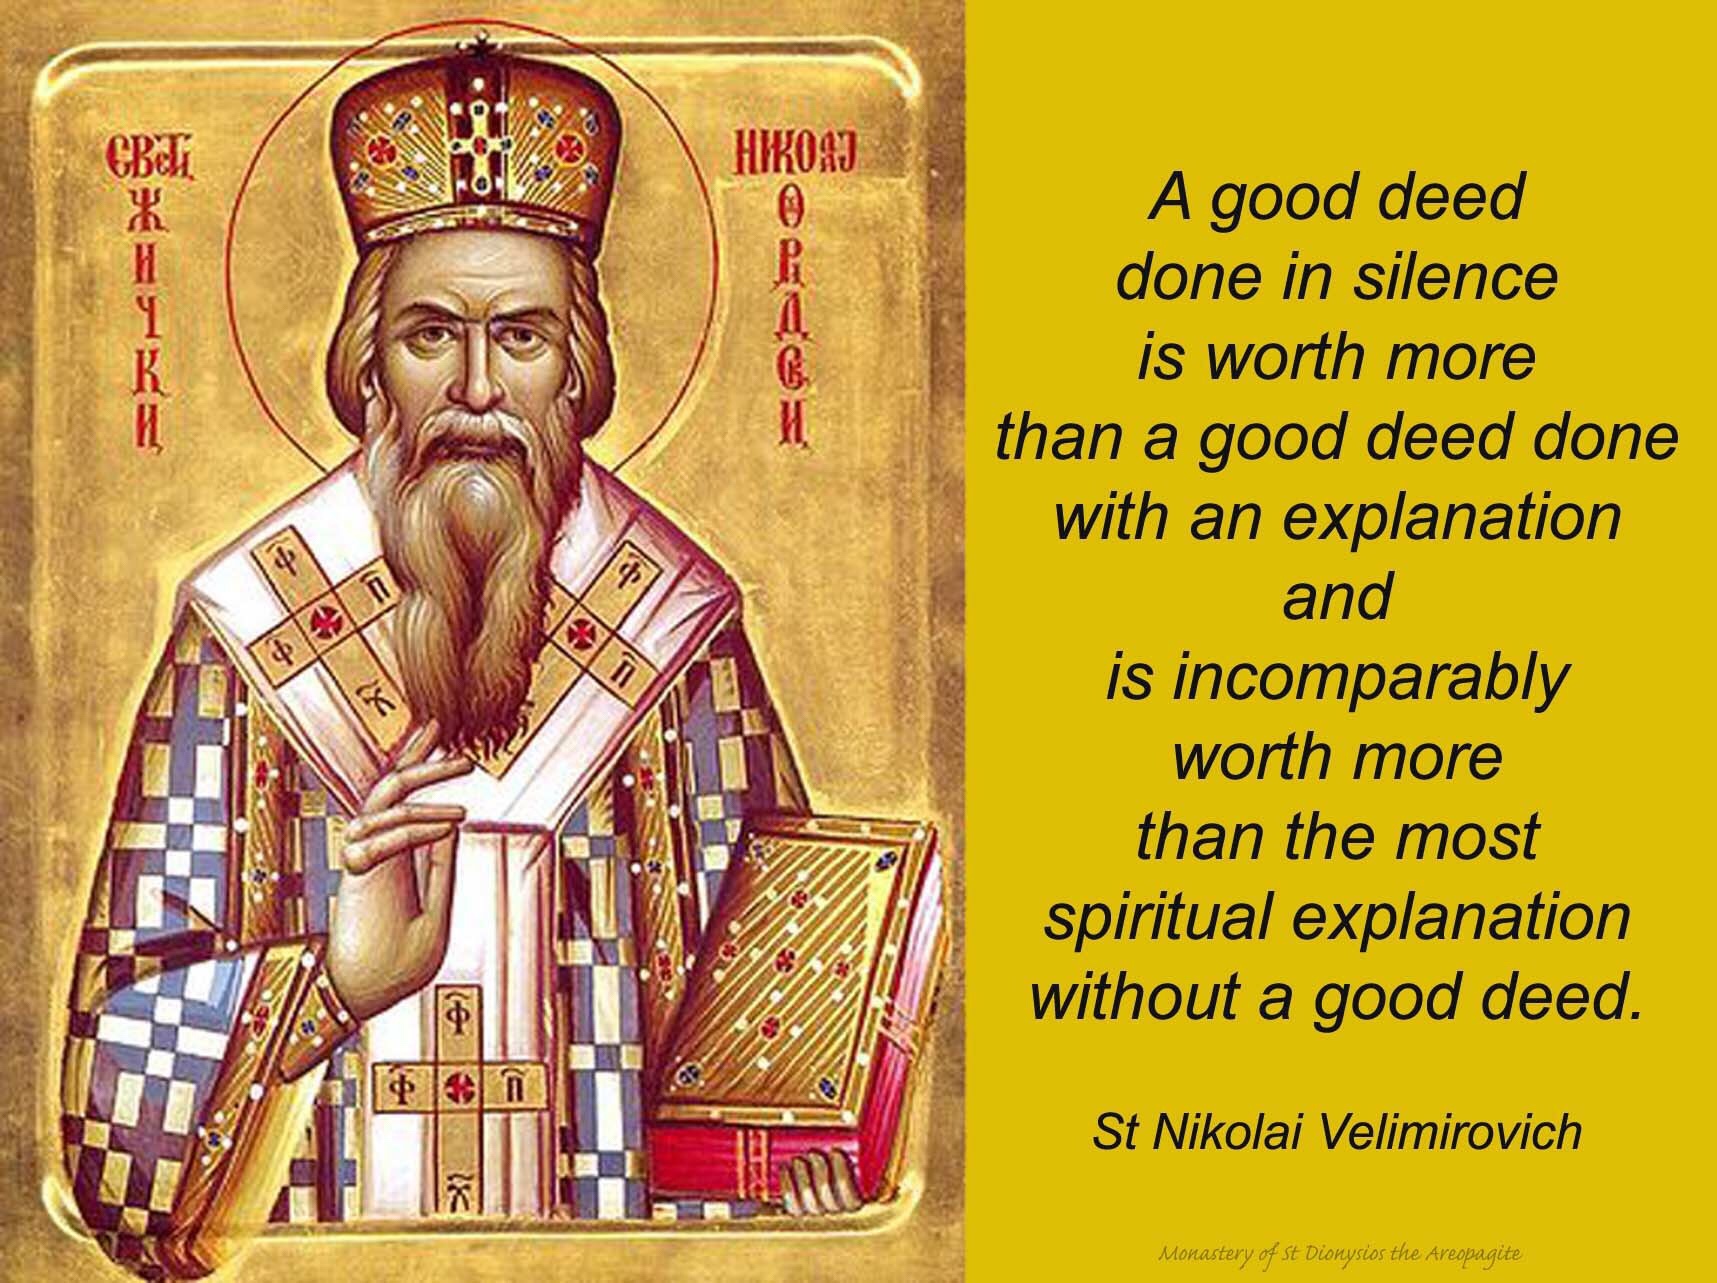 A good deed done in silence is more valuable - St. Nicolai Velimirovich